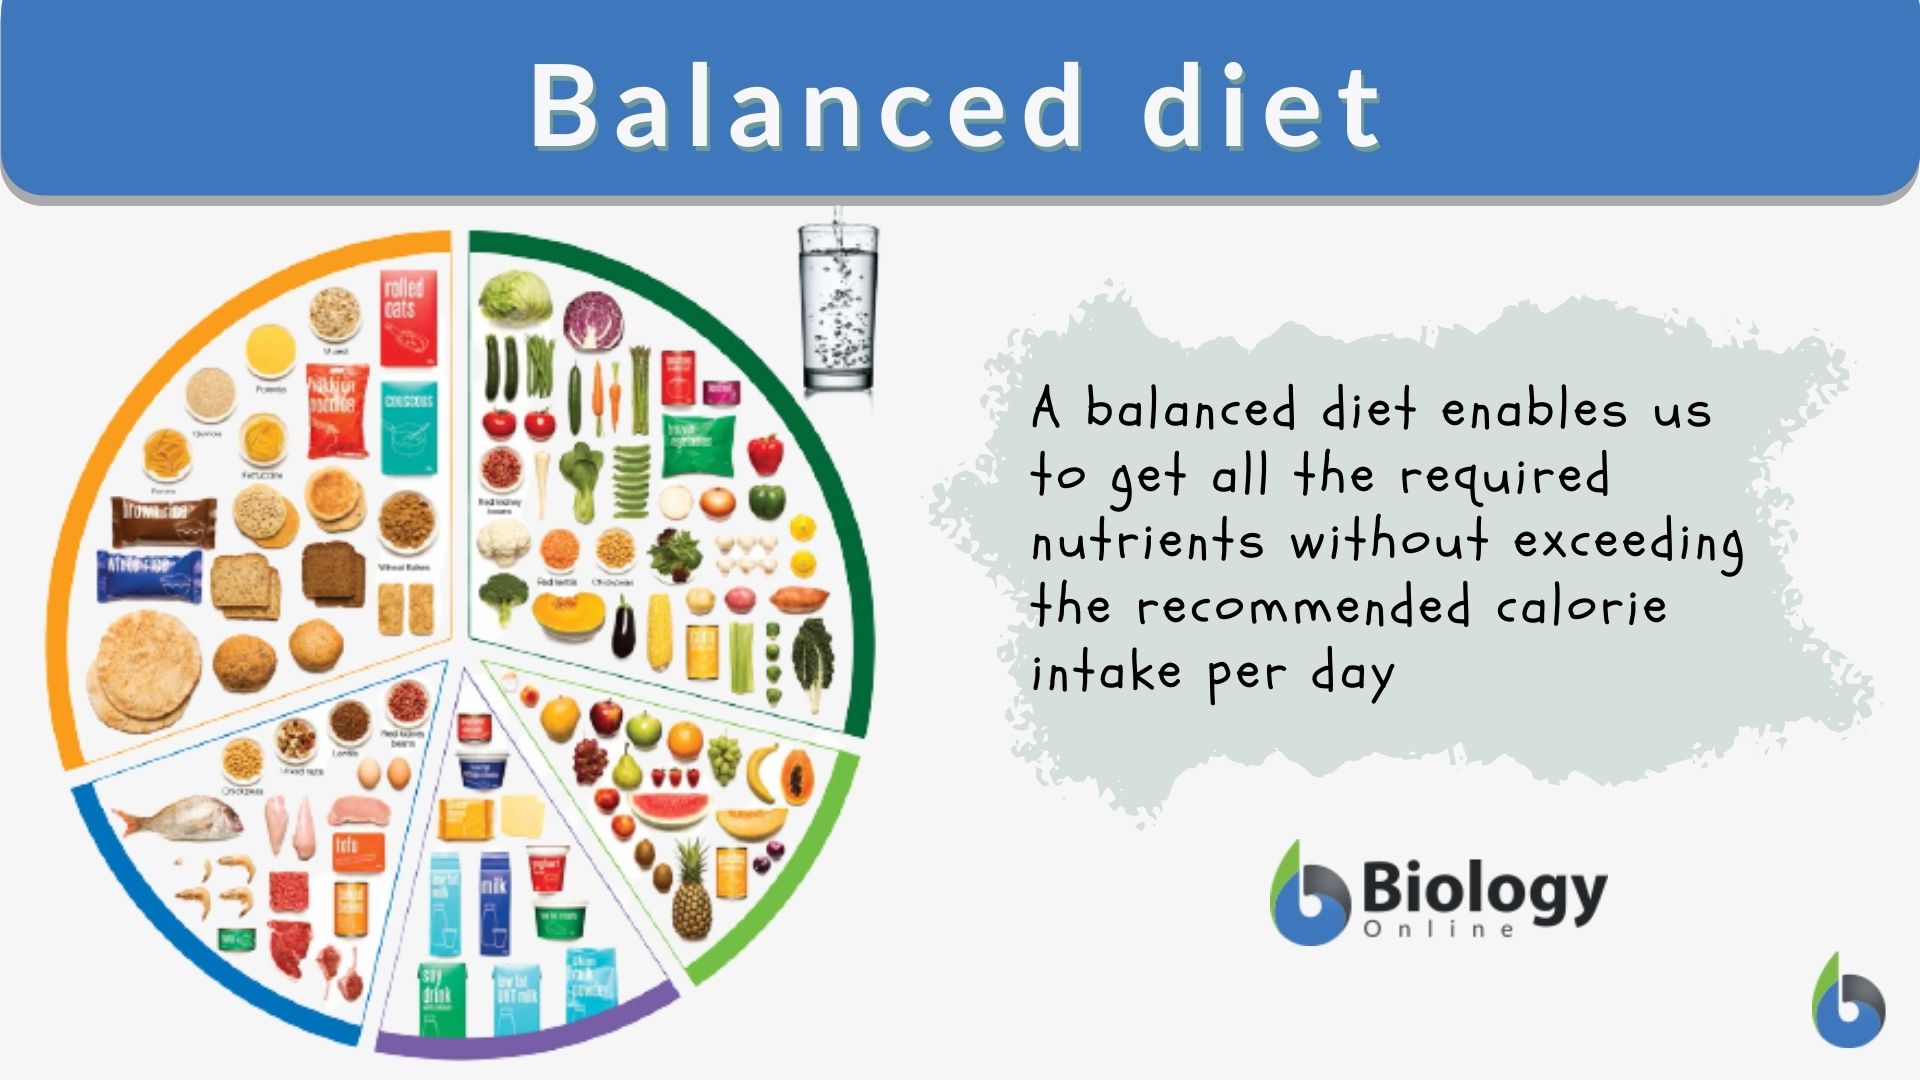 Balanced diet recommendations